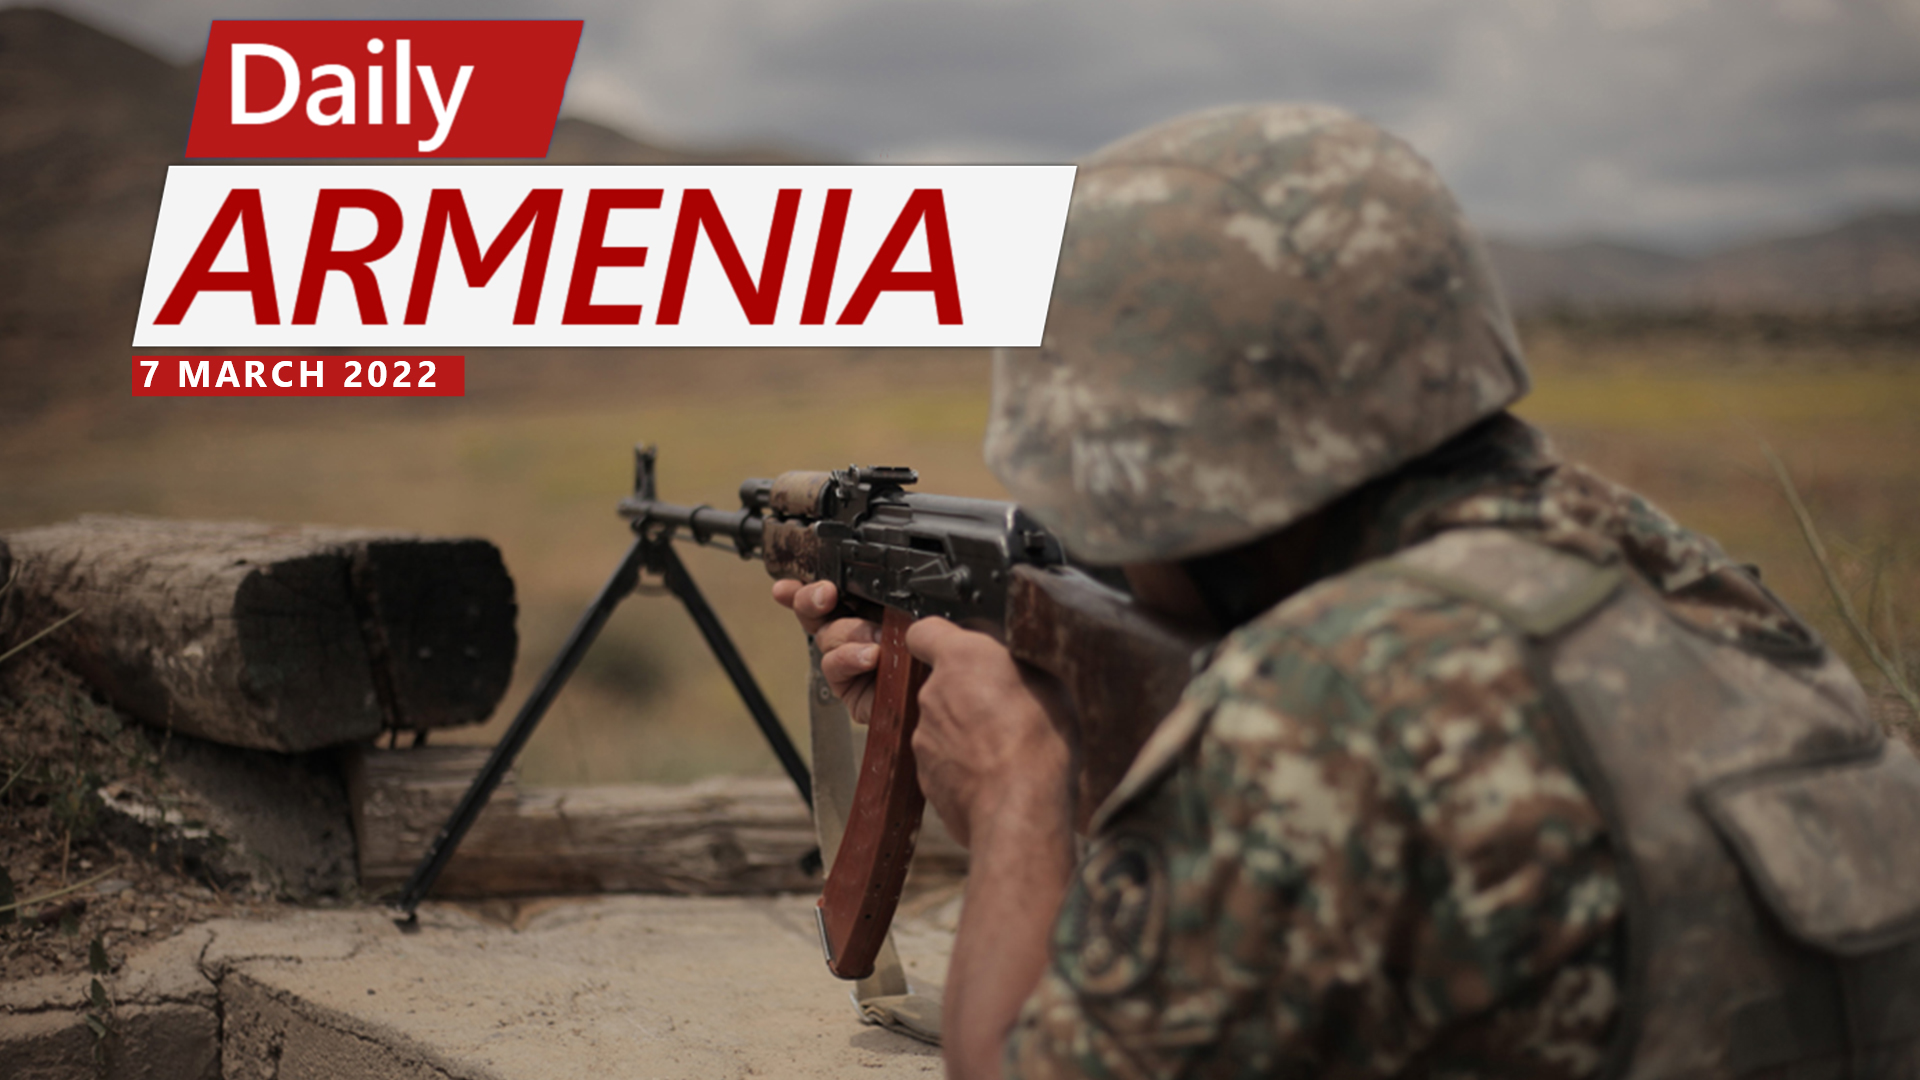 Armenian soldier killed by Azerbaijani forces, shattering period of relative calm